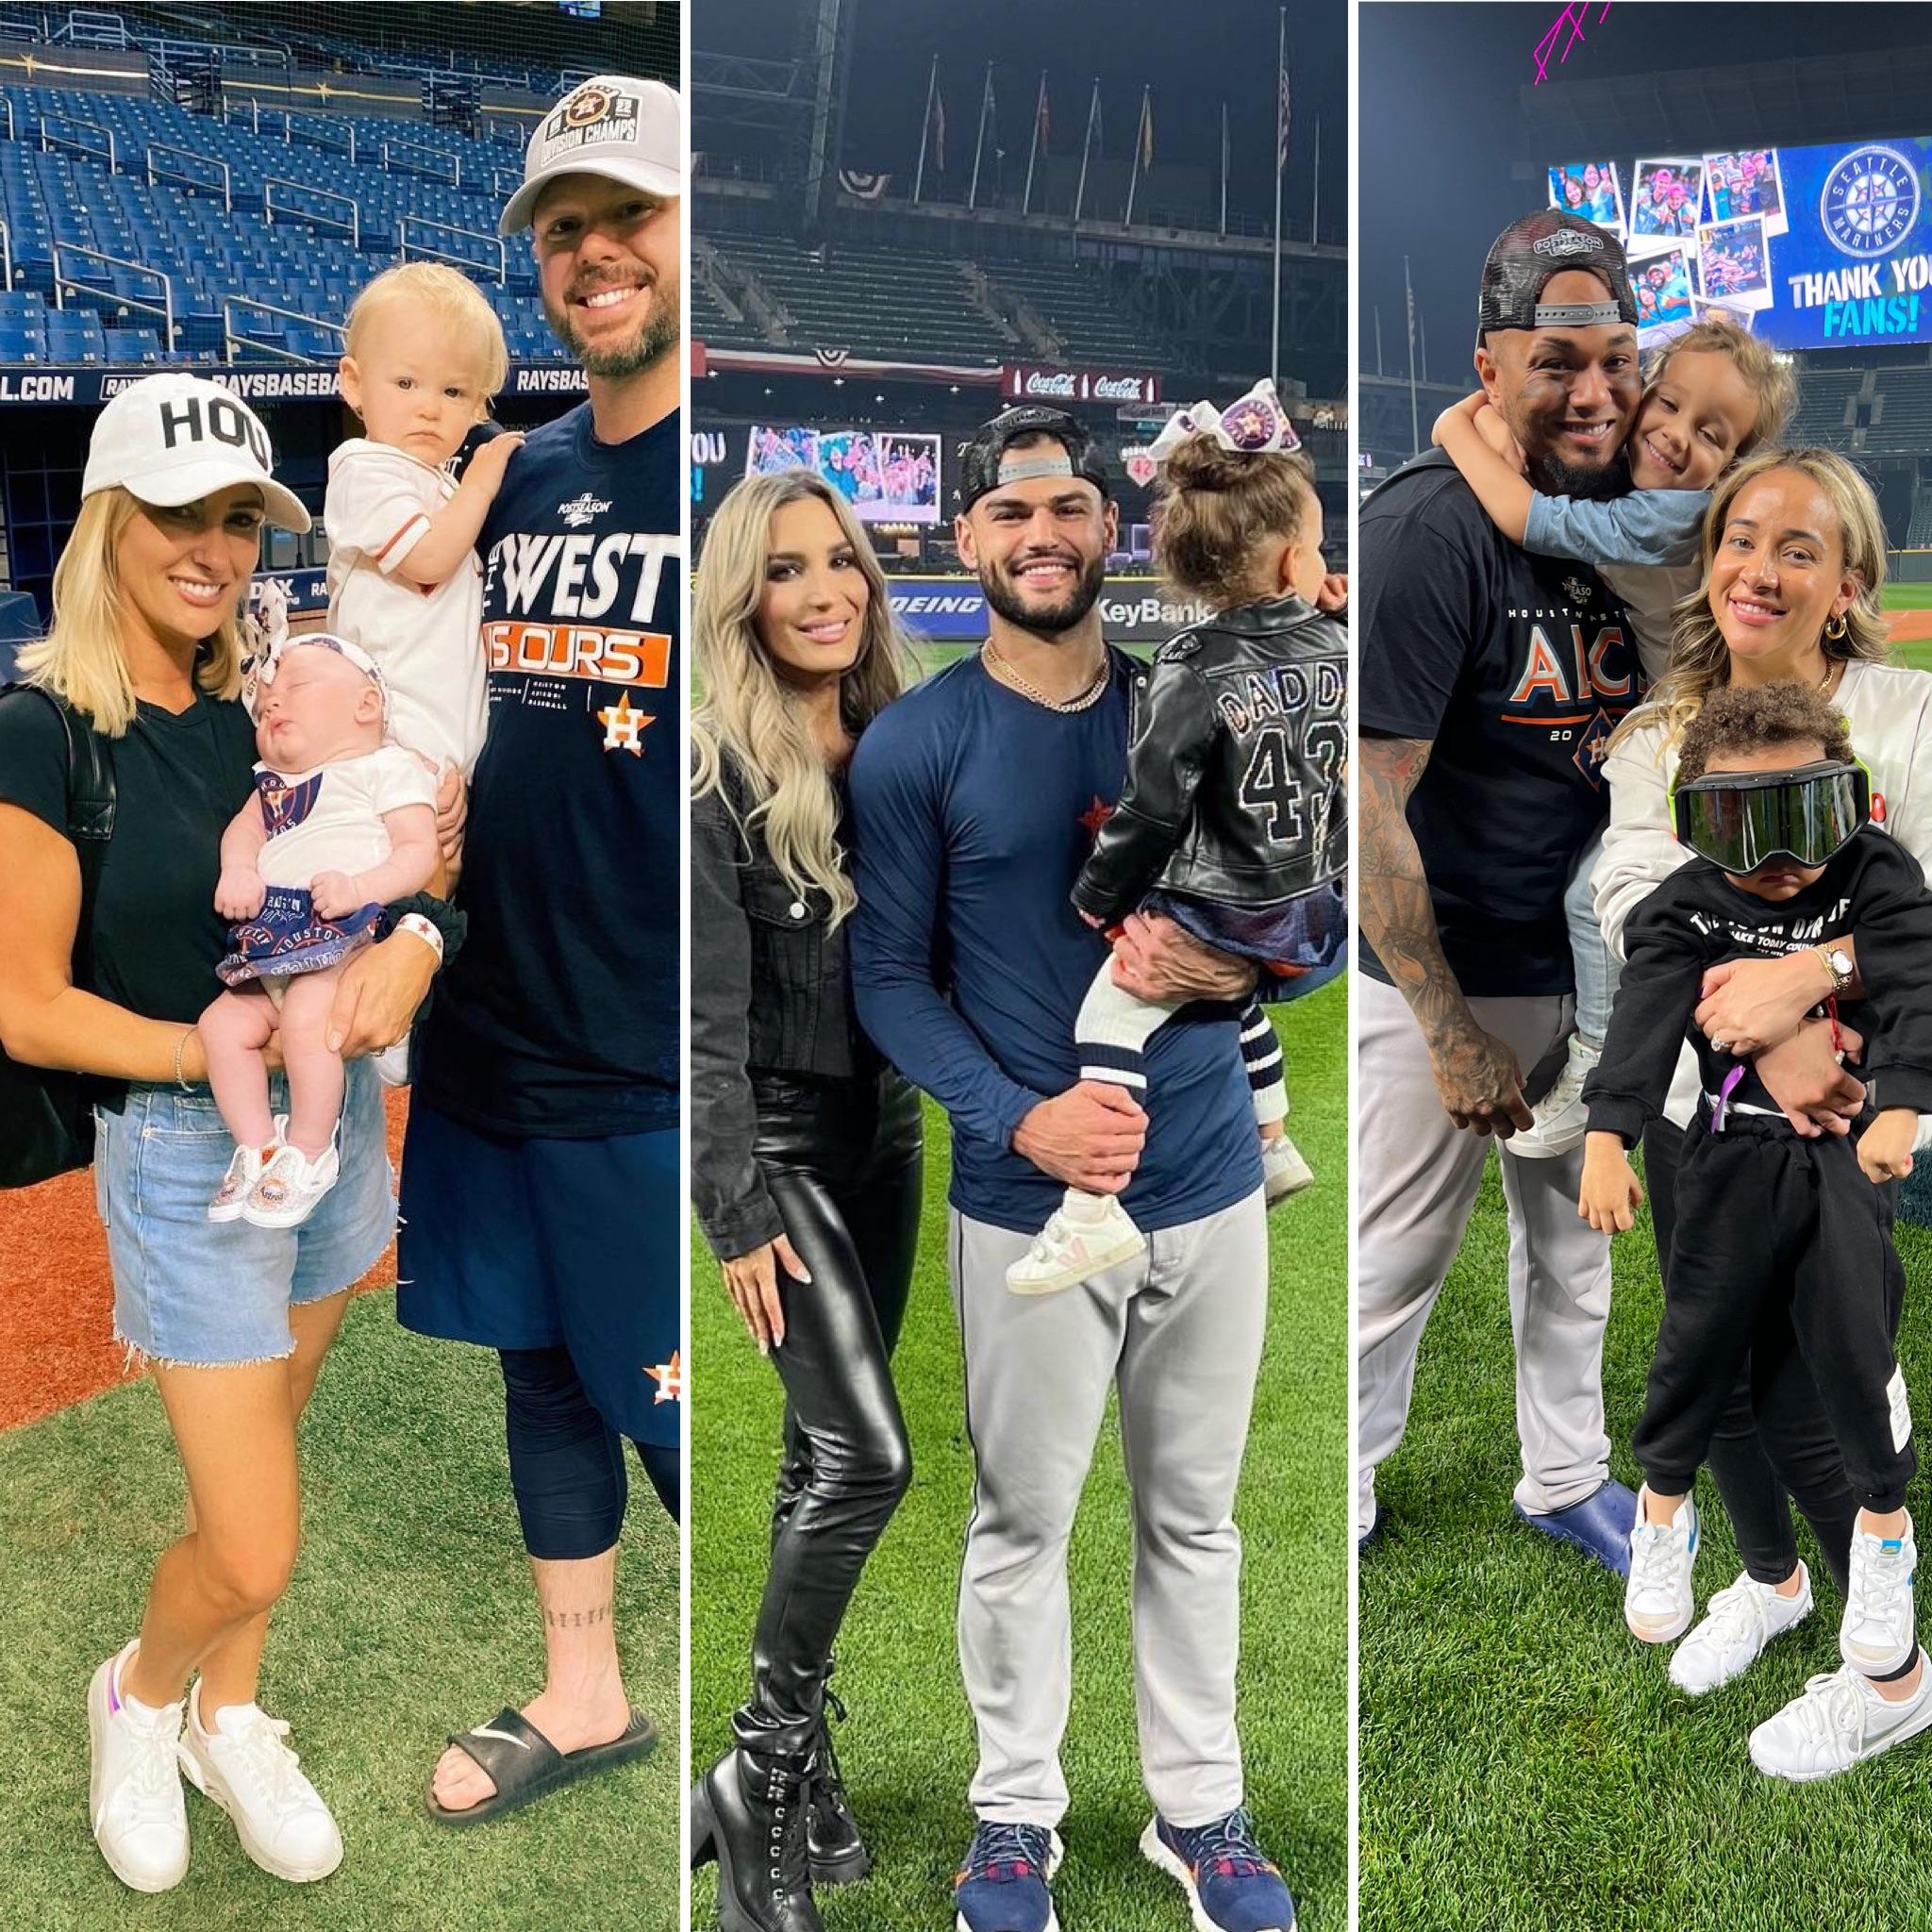 Family photos: Meet the Houston Astros' wives and kids